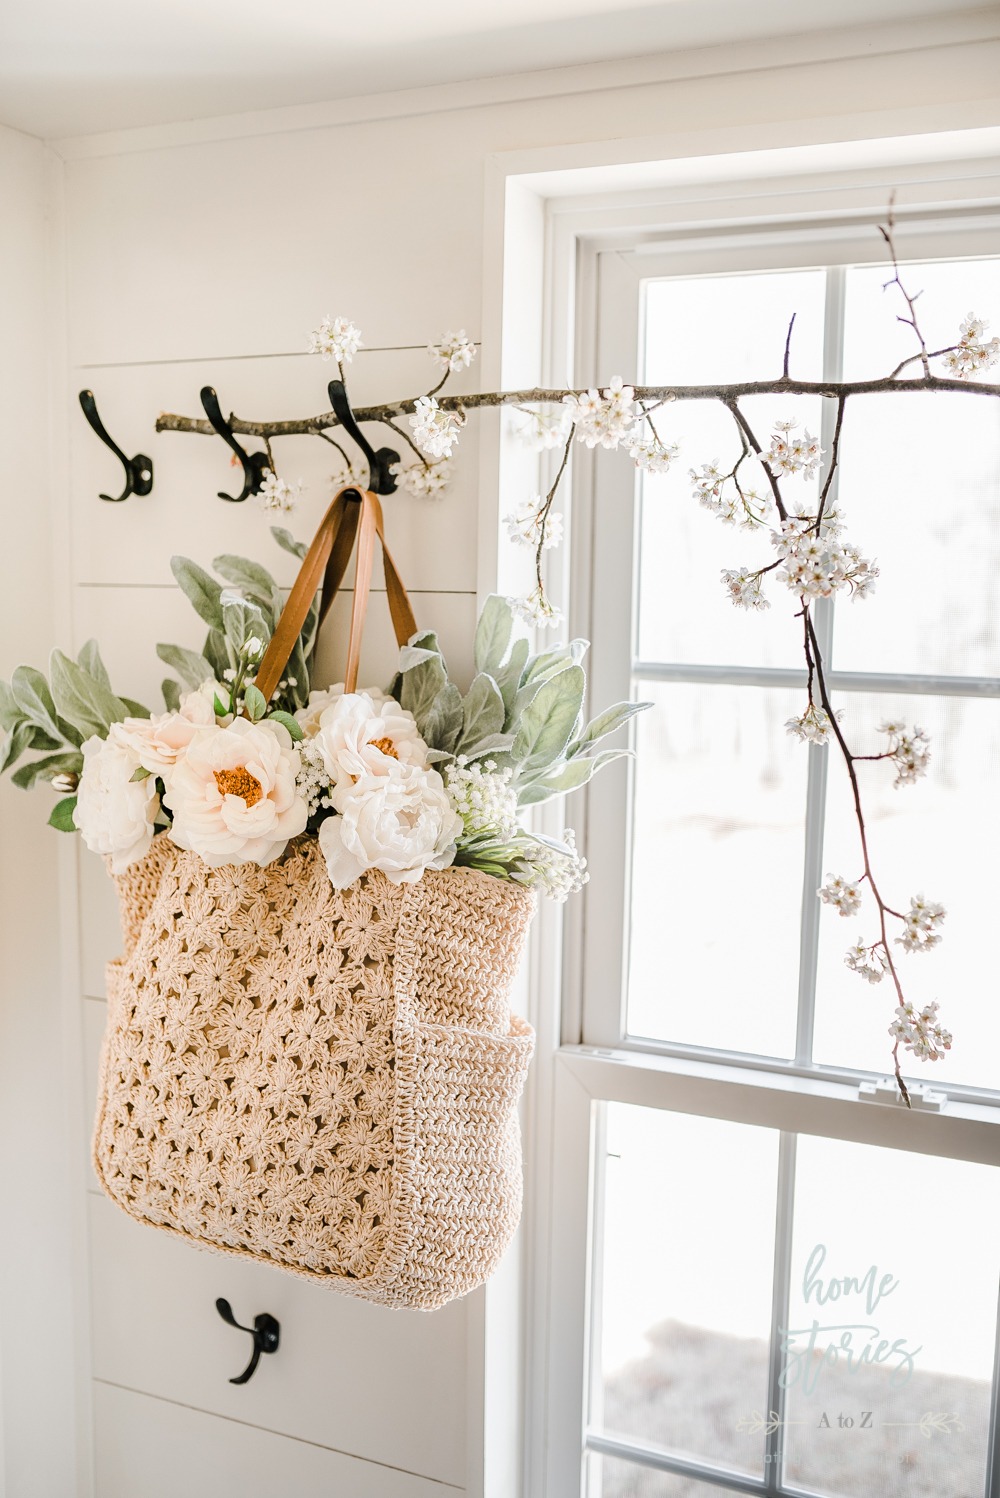 A crochet tote bag hanging on a hook with flowers inside